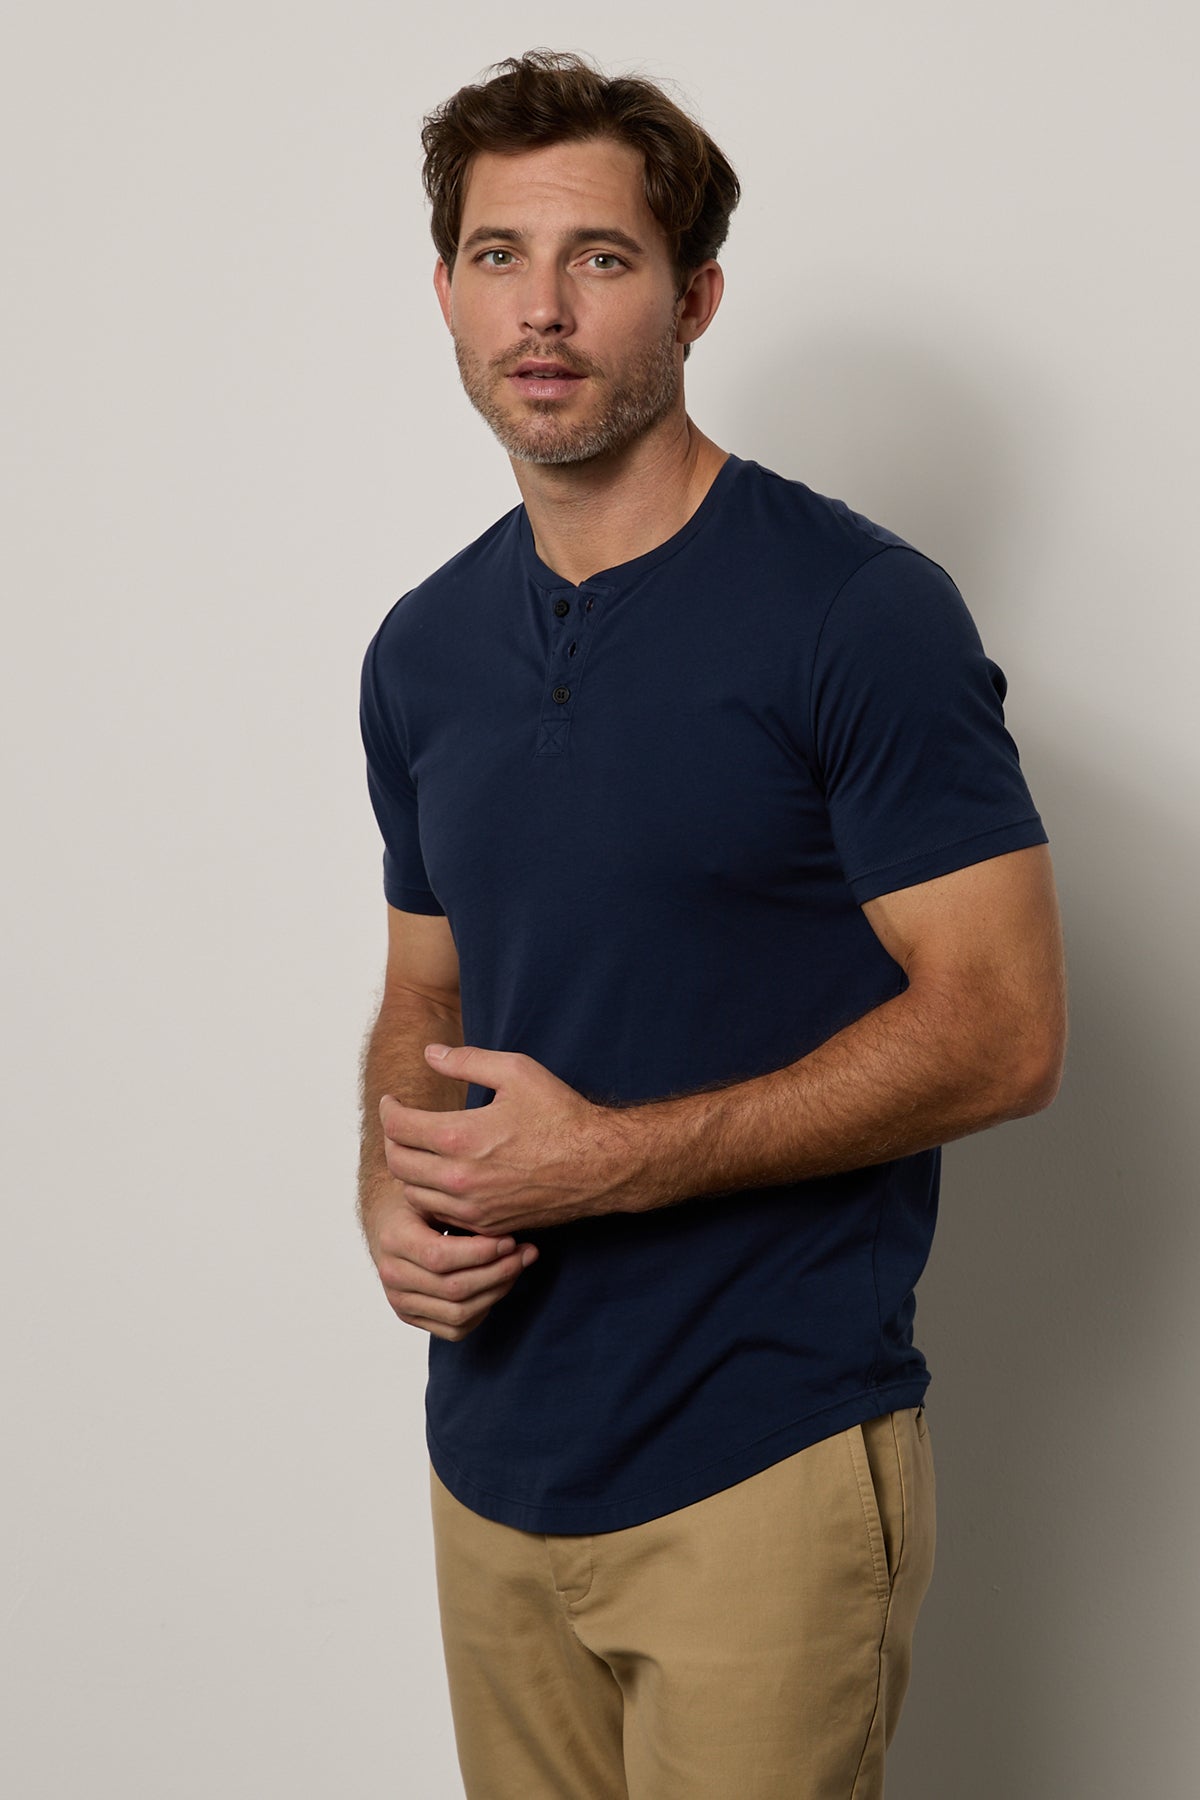 Fulton Short Sleeve Henley in midnight with Aiden pant in khaki front-26079171674305